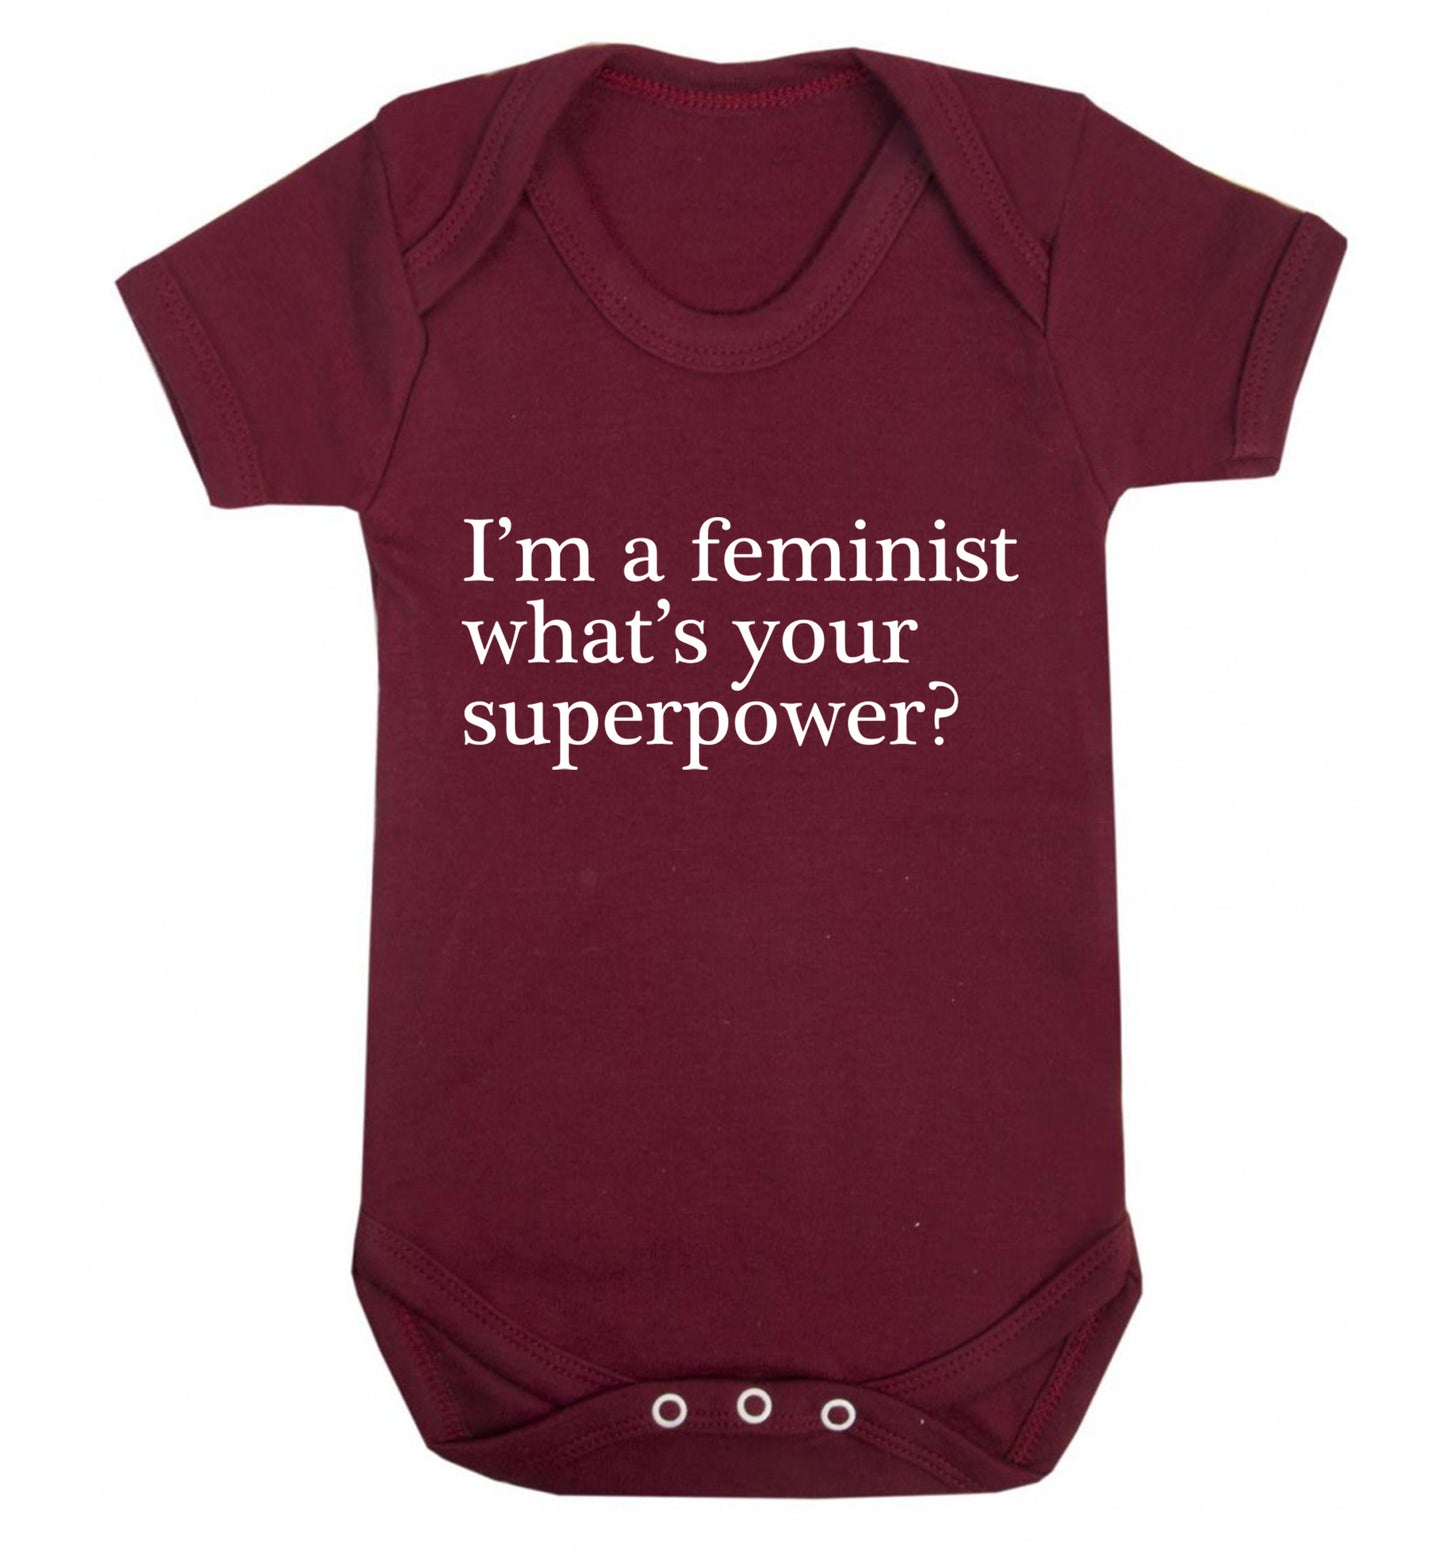 I'm a feminist what's your superpower? Baby Vest maroon 18-24 months